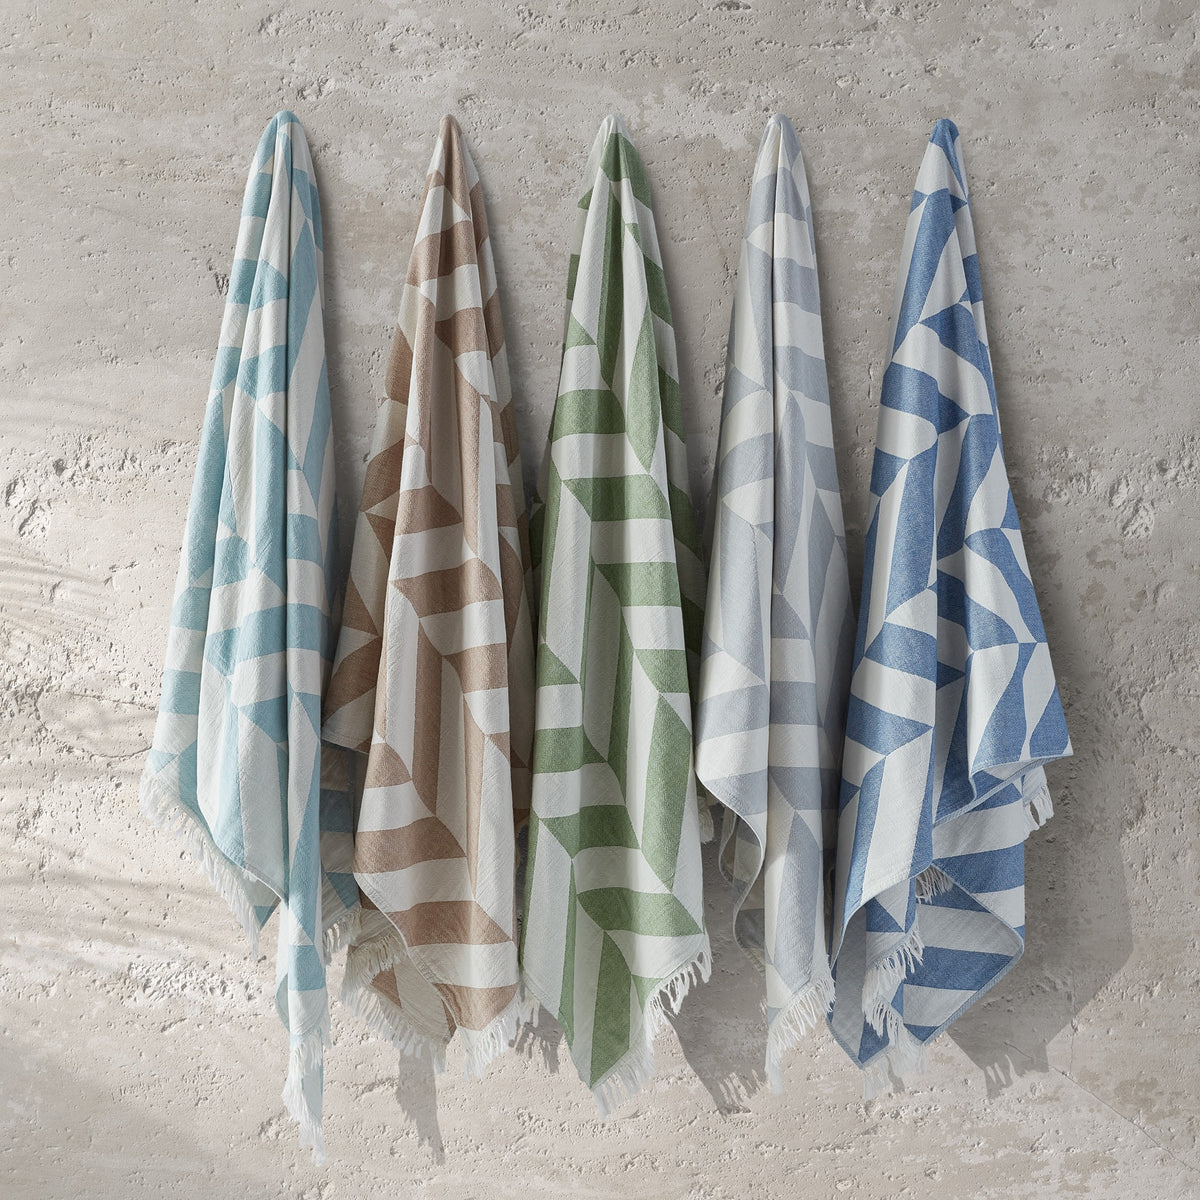 Matouk Paros Beach Towels in All Colors Hanging on the Wall